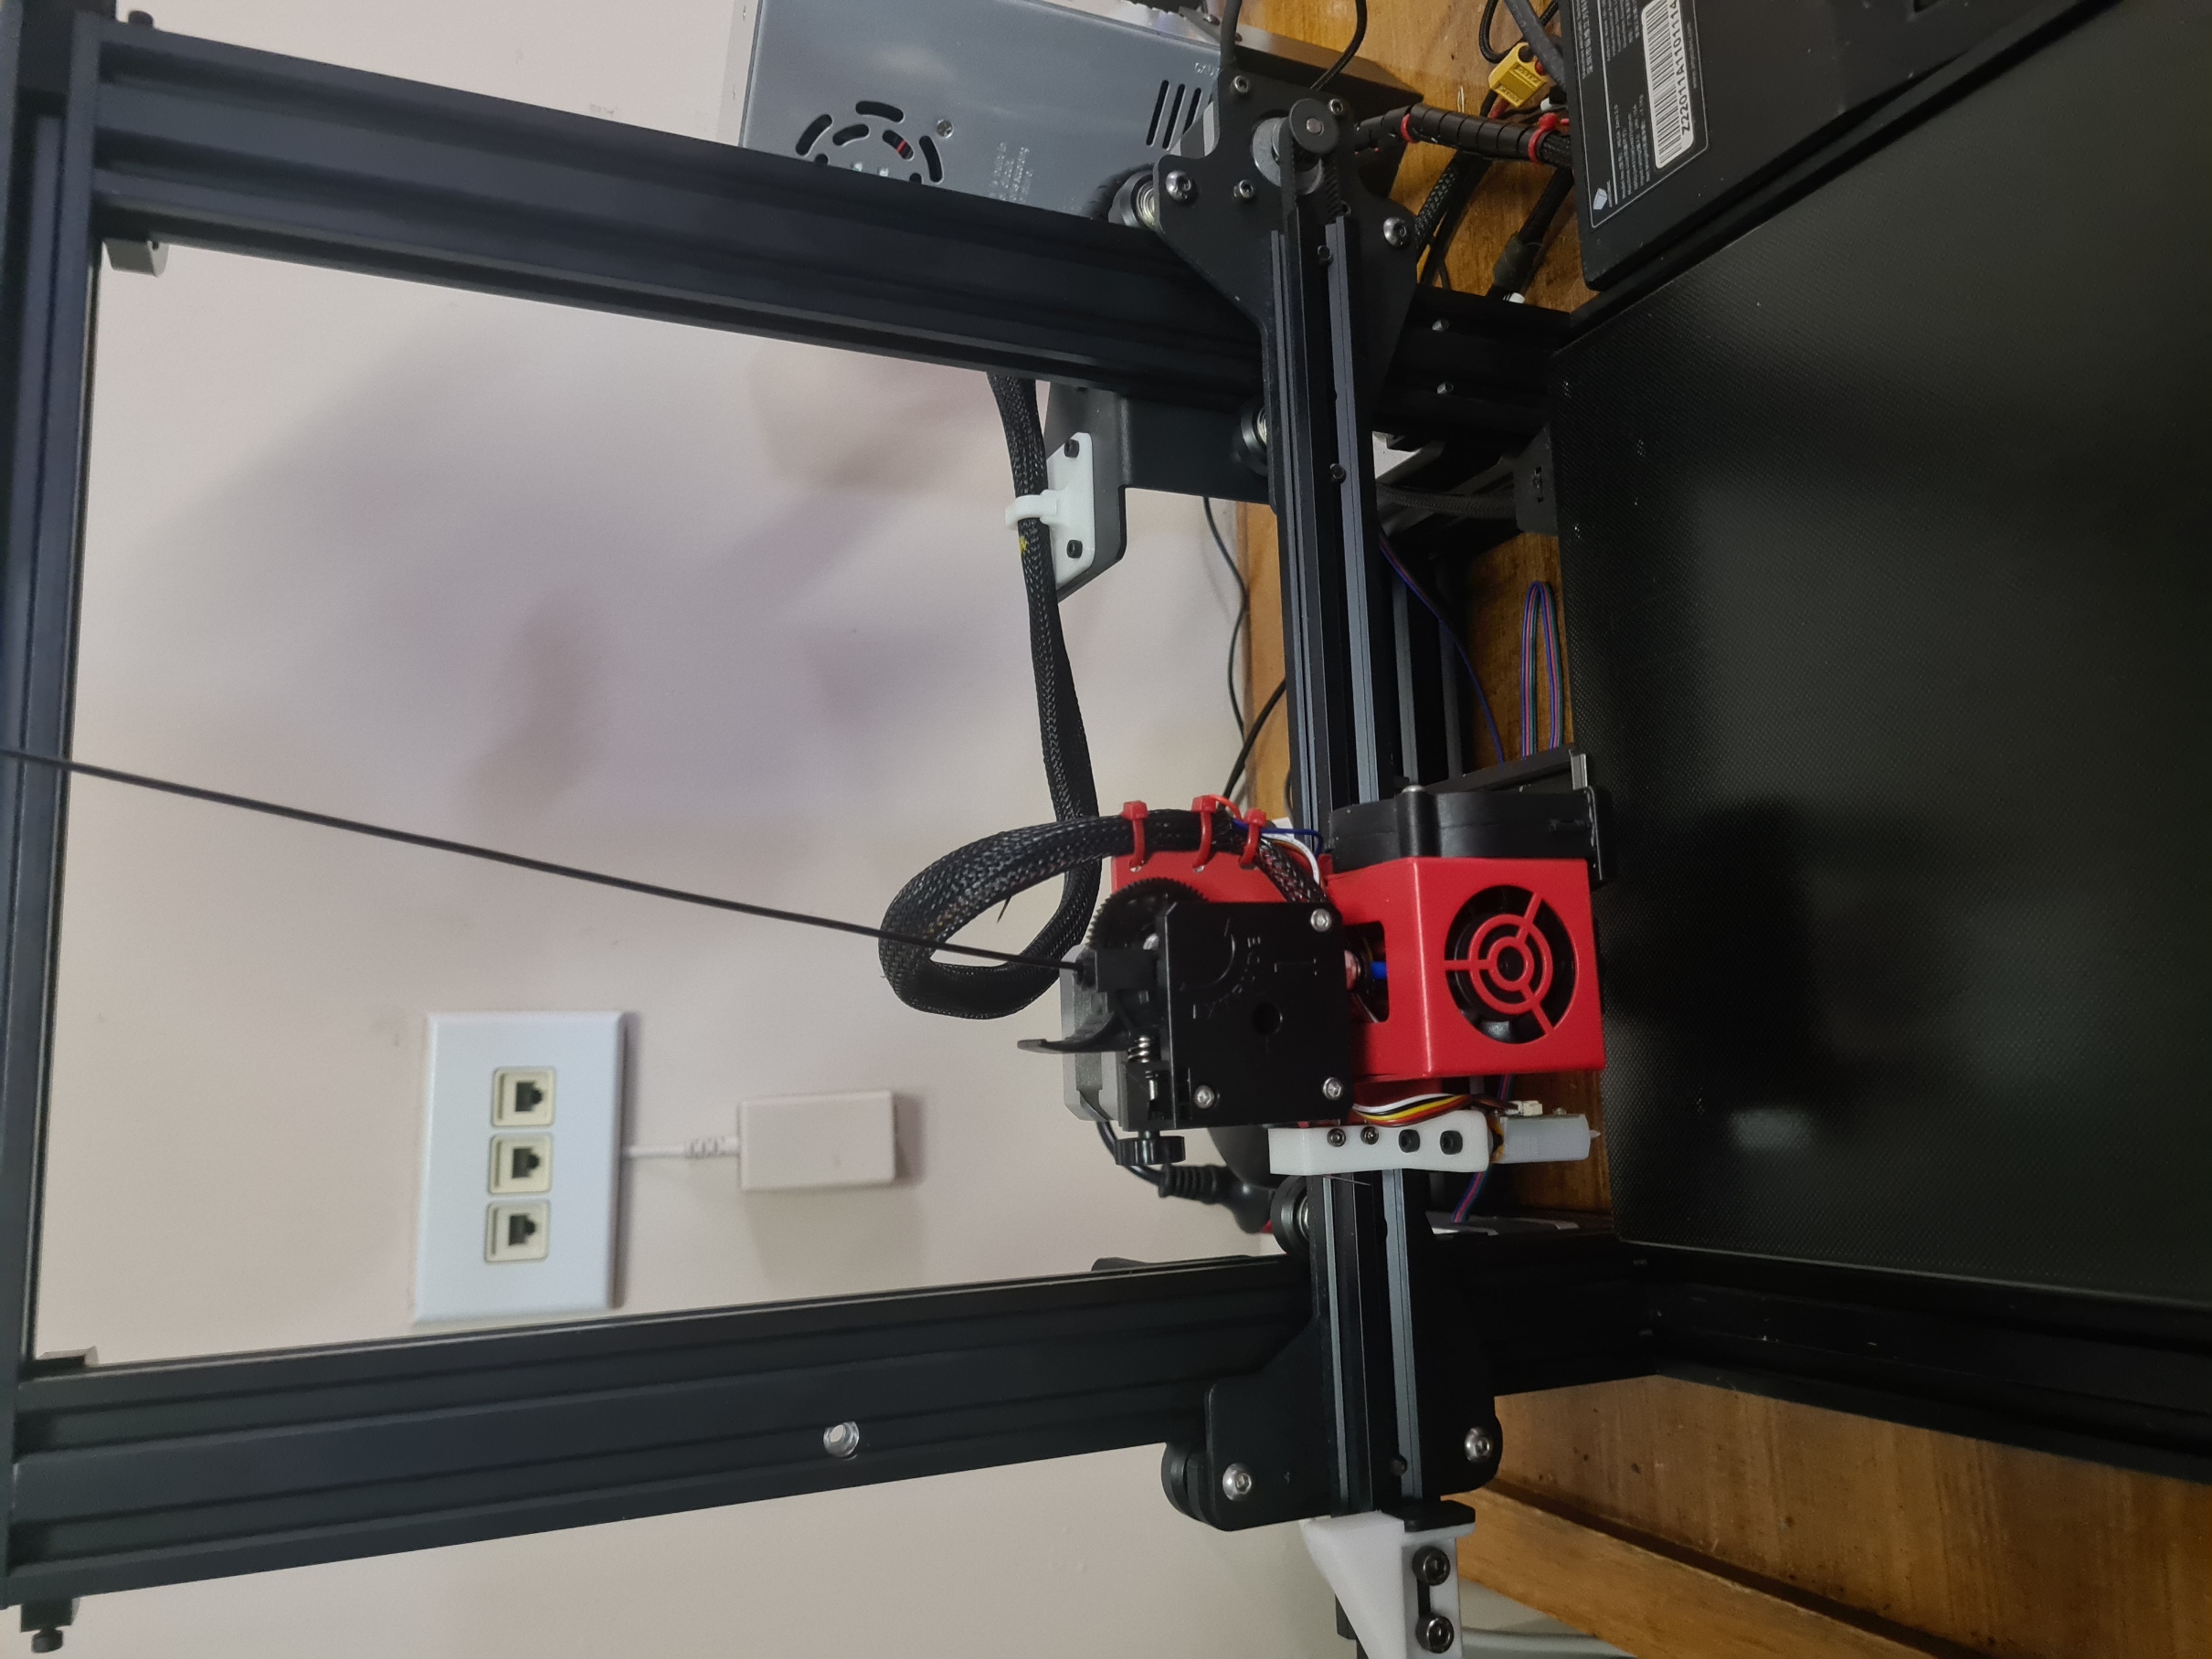 Anycubic Mega Zero 2.0 - Ender 3 Direct Drive + 3DTouch + Endstop